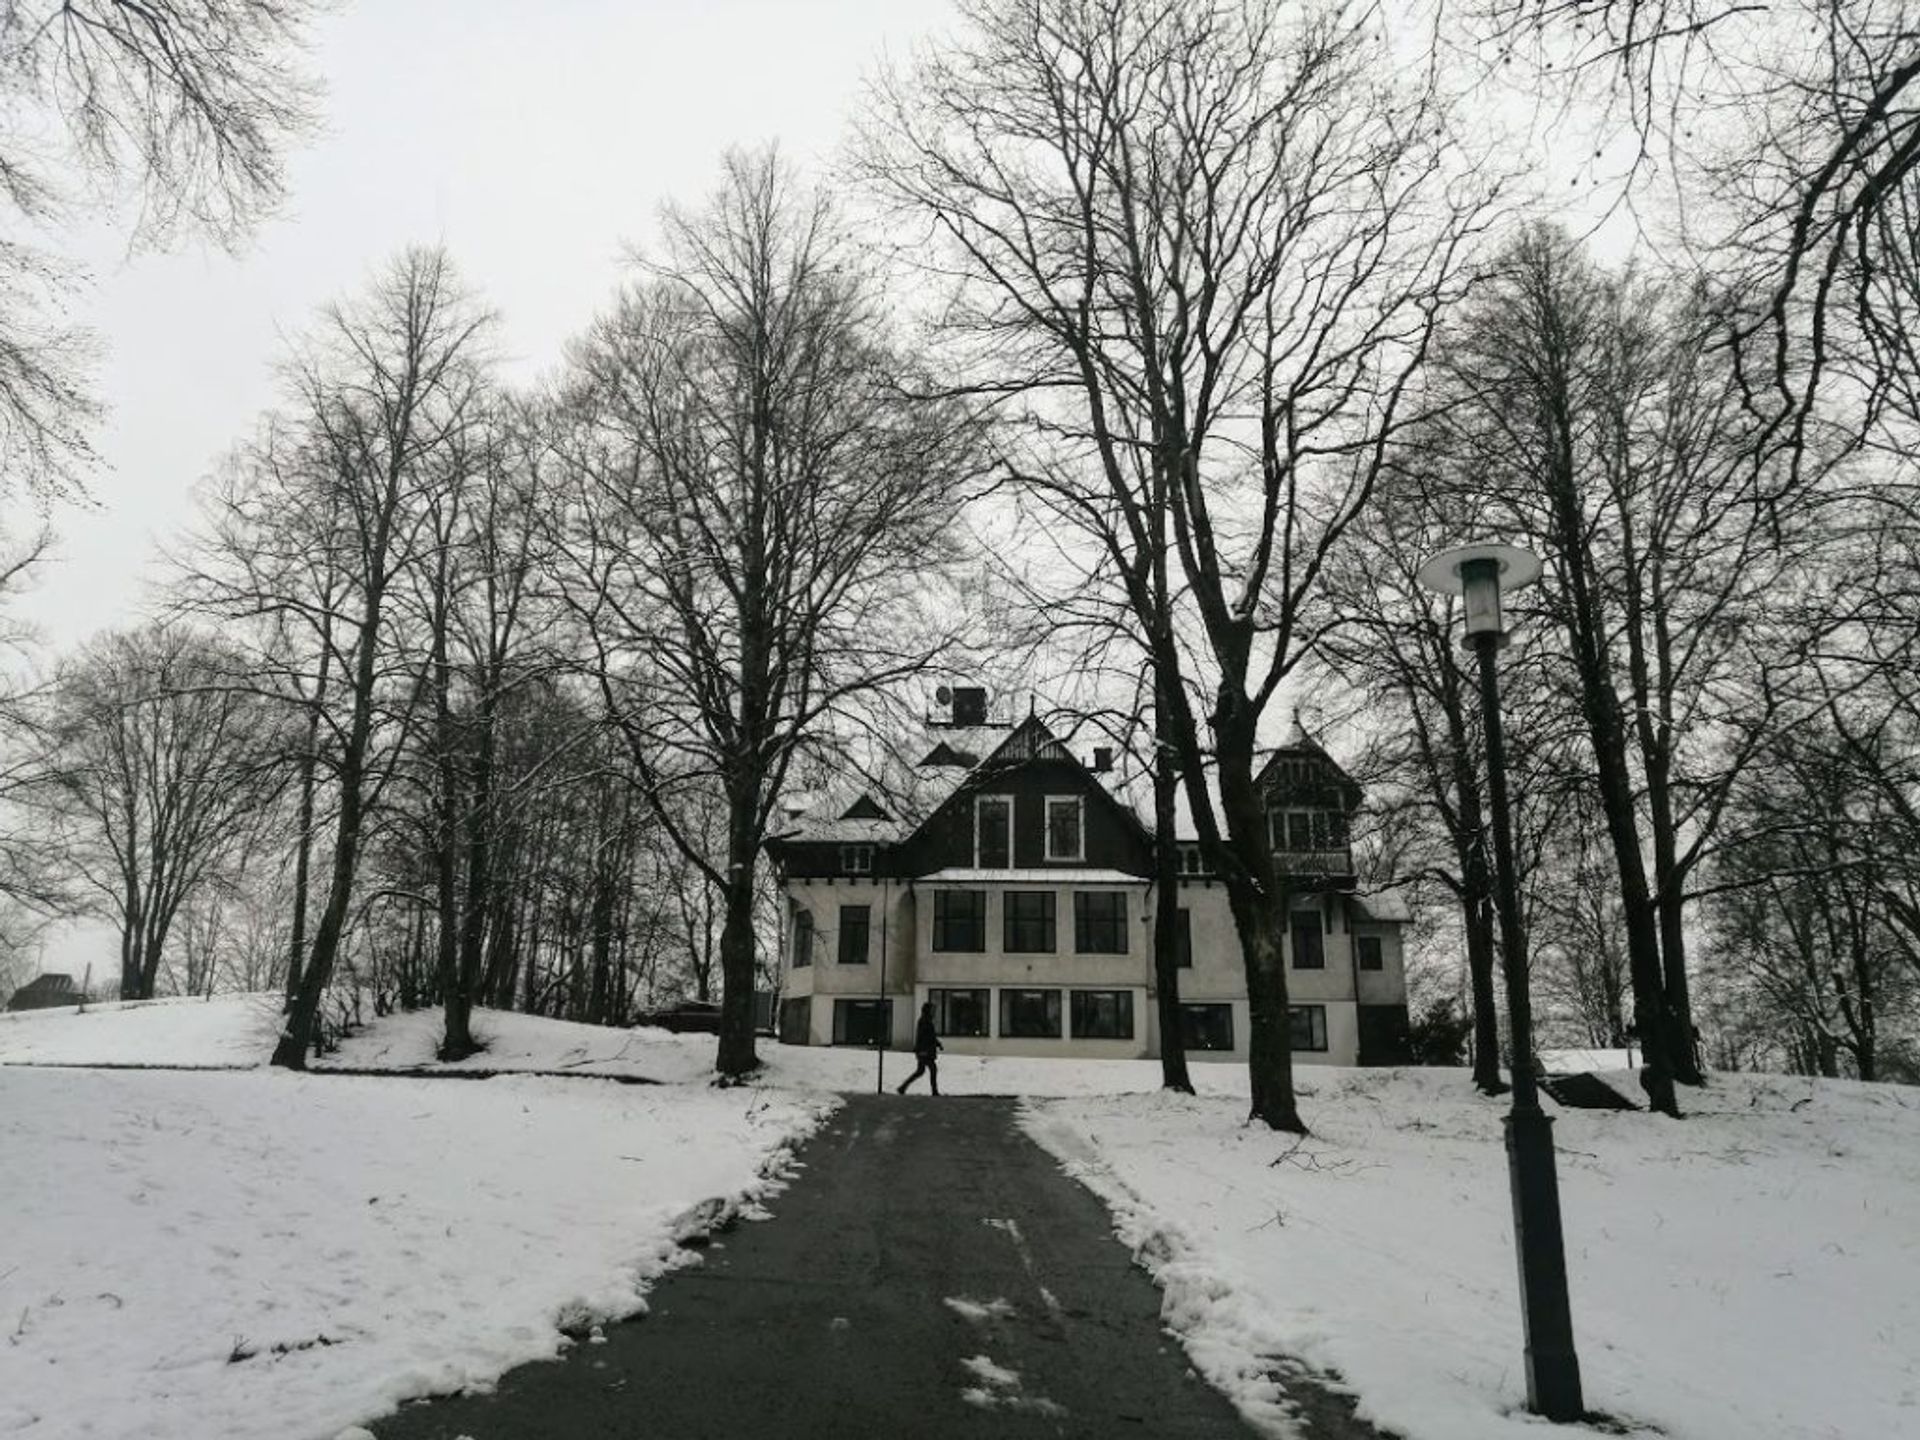 A large, white house surrounded by snow.